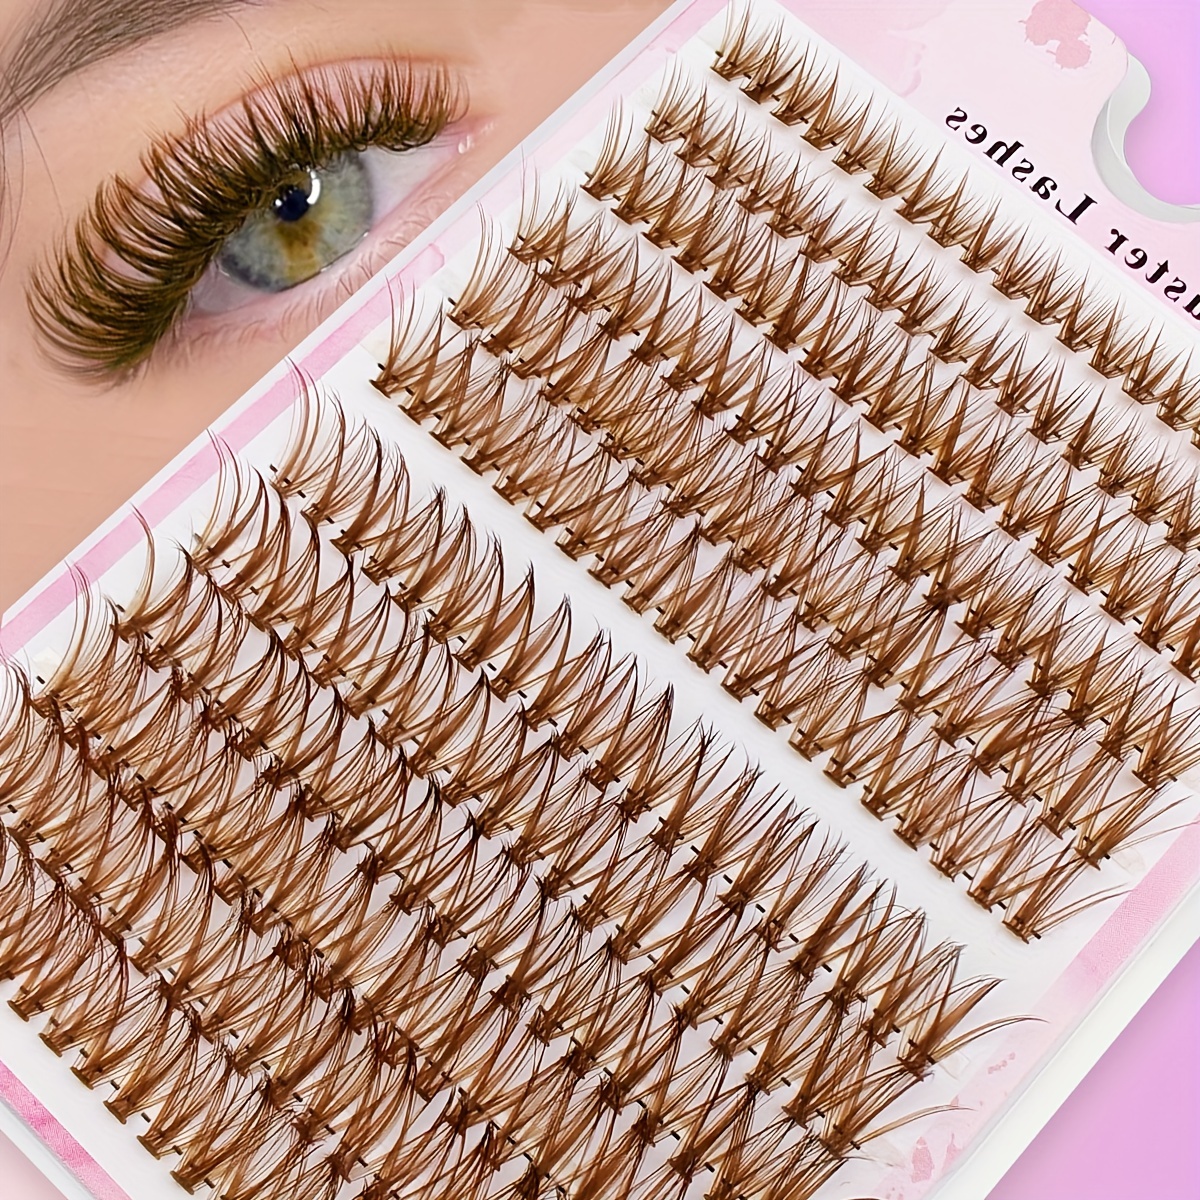 

240-piece Brown Lash Clusters - Diy Eyelash Extensions, Wispy & Soft, Natural Look, C-, 8-16mm Mix For Thick, Cat Eye Effect Eyelashes Cat Eye Cat Eye Eyelashes